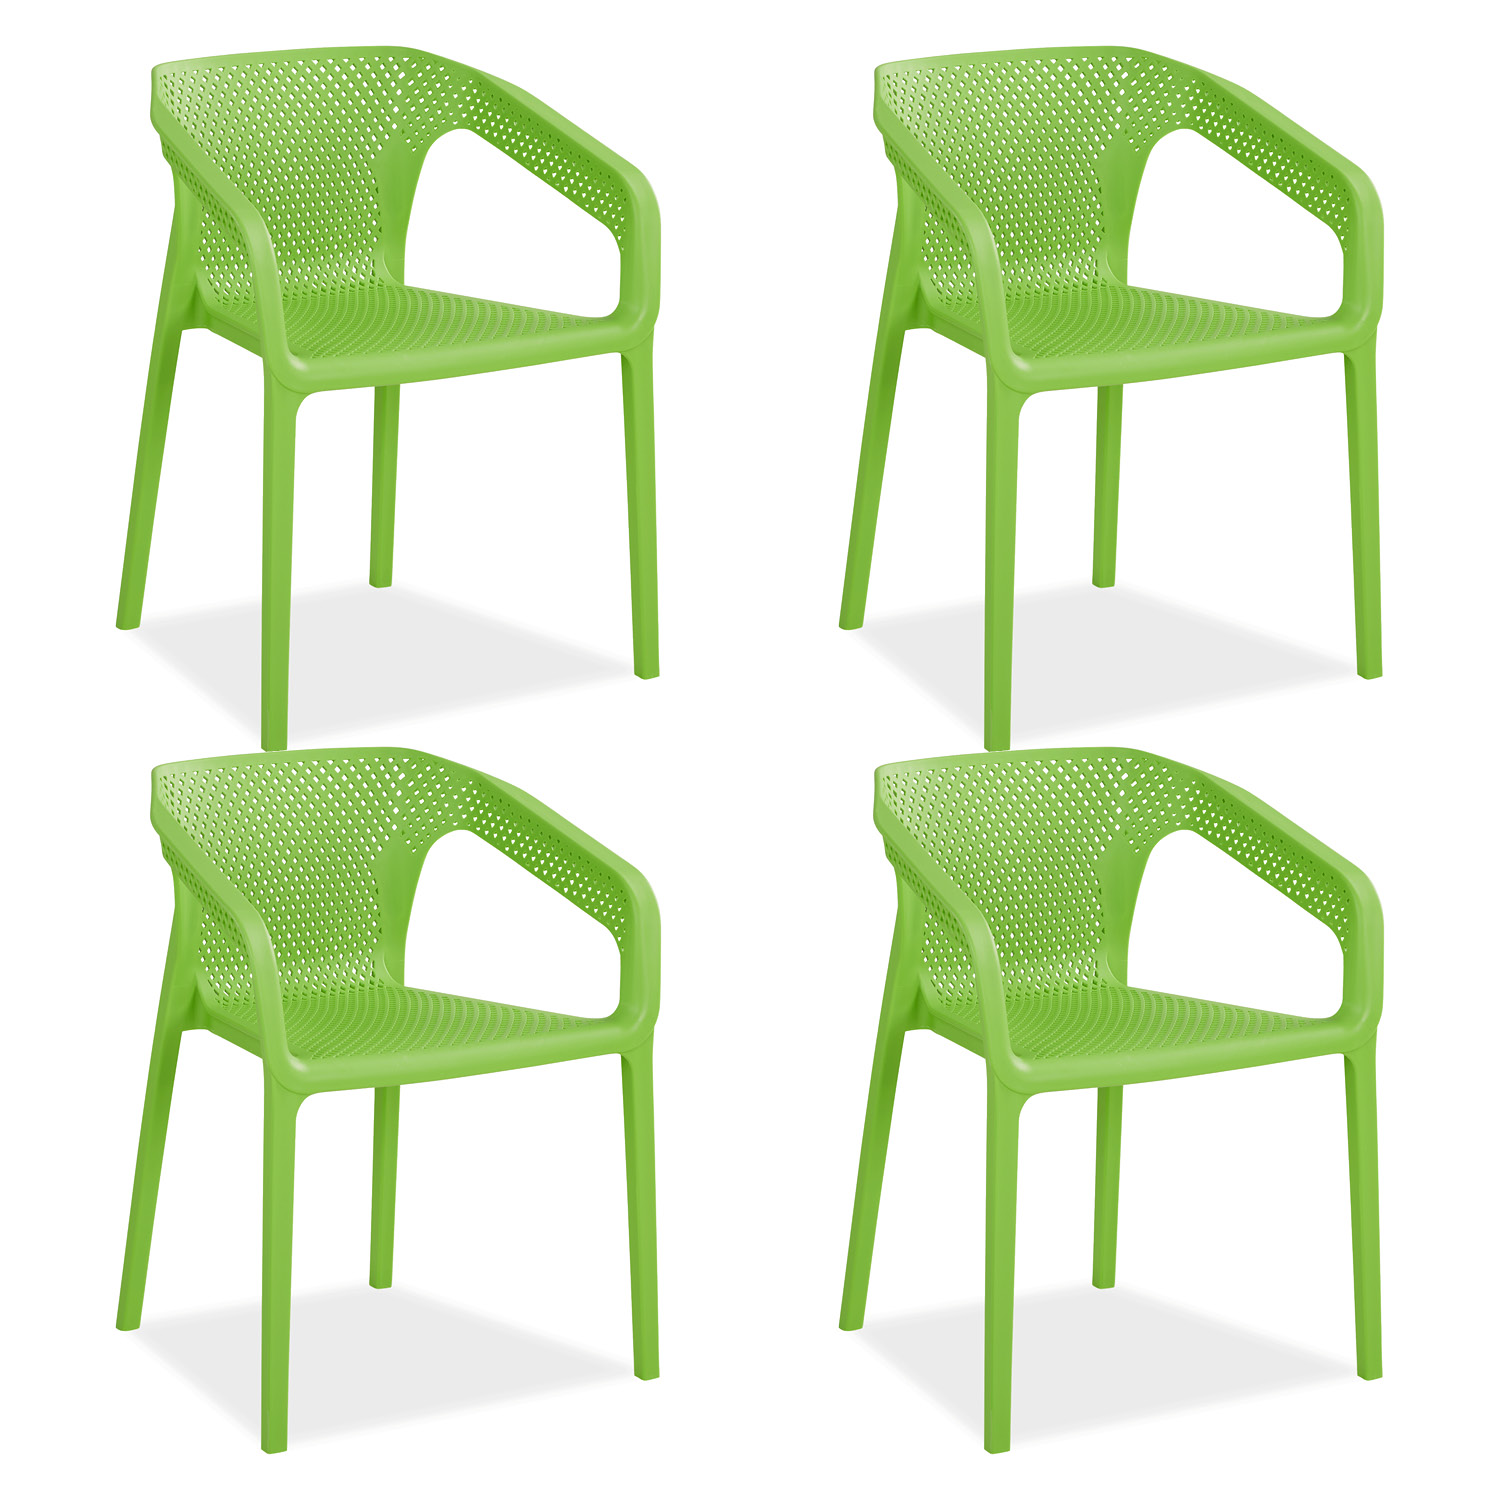 Set of 2, 4 or 6 Garden chair with armrests Camping chairs Different Colours Outdoor chairs Plastic Egg chair Lounger chairs Stacking chairs